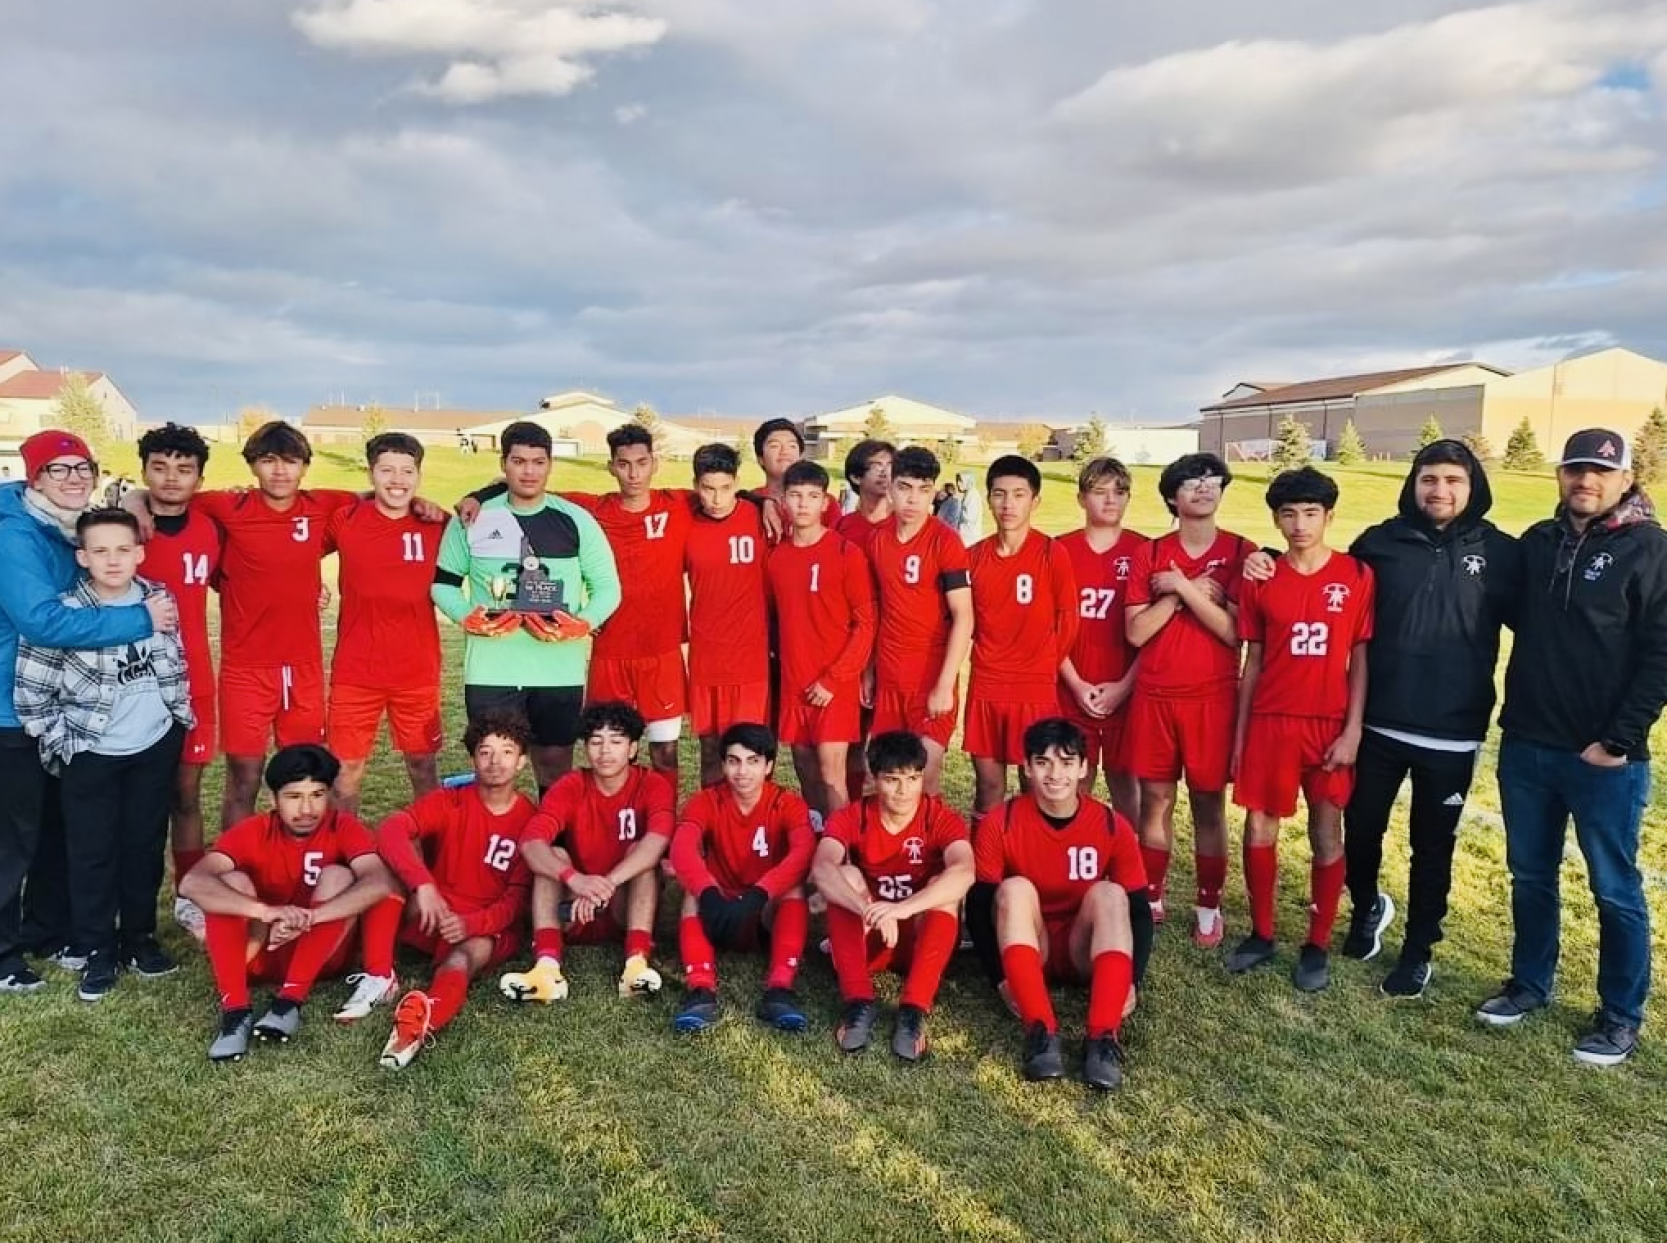 Miguel Mata Leads American Falls High School Boys Soccer Team to Sixth Consecutive State Tournament